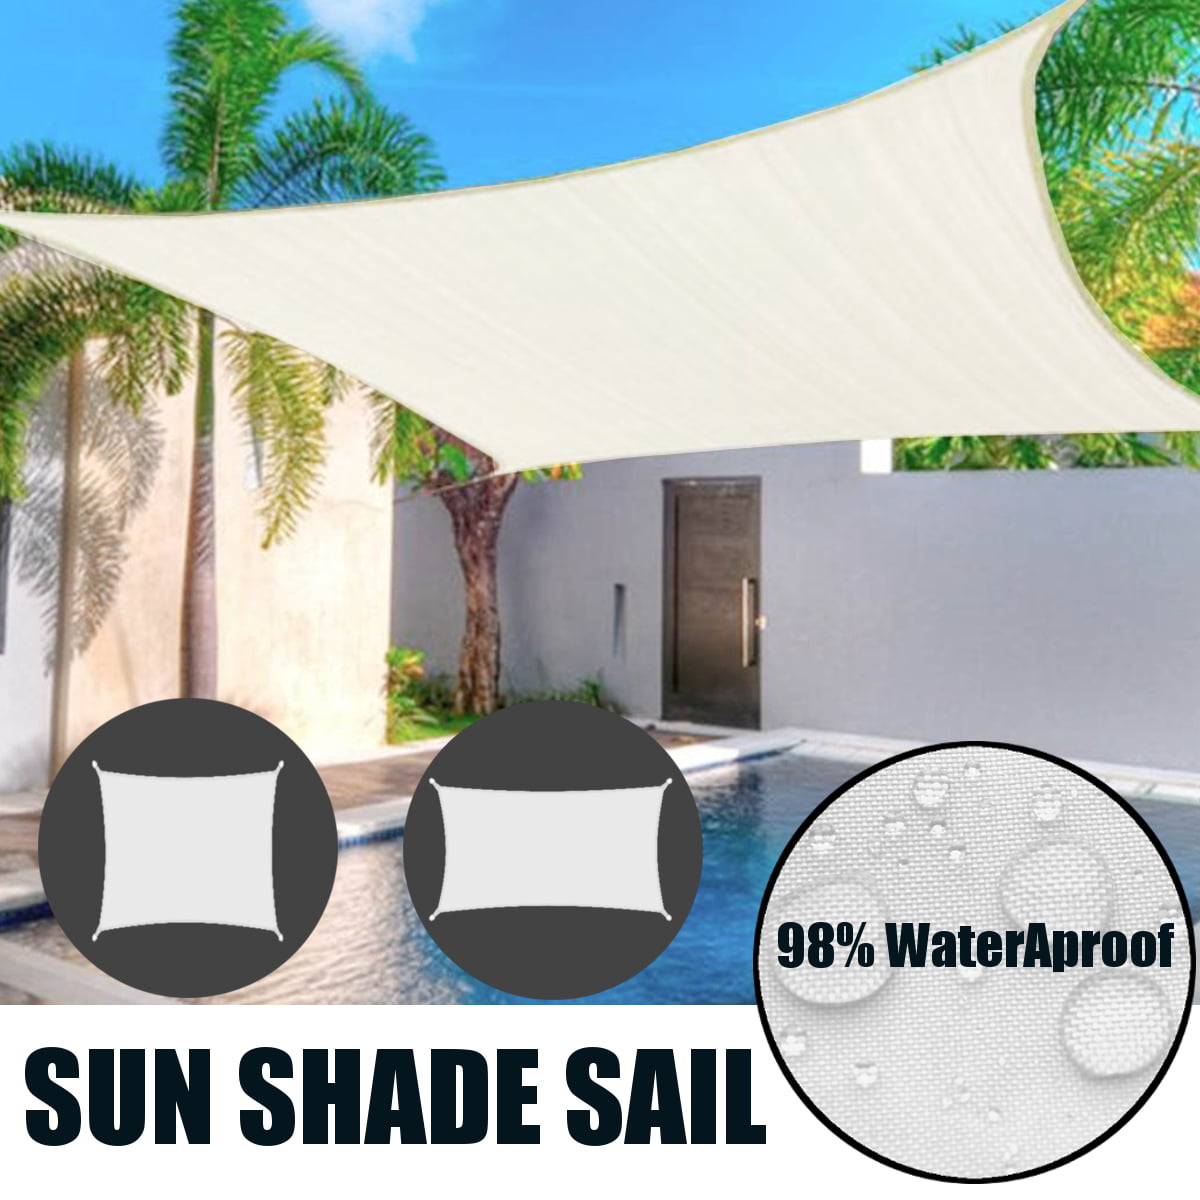 Details about   Sun Shade Sail Rectangle 8' UV Block Outdoor Awnings Patio Top Canopy Multi-size 